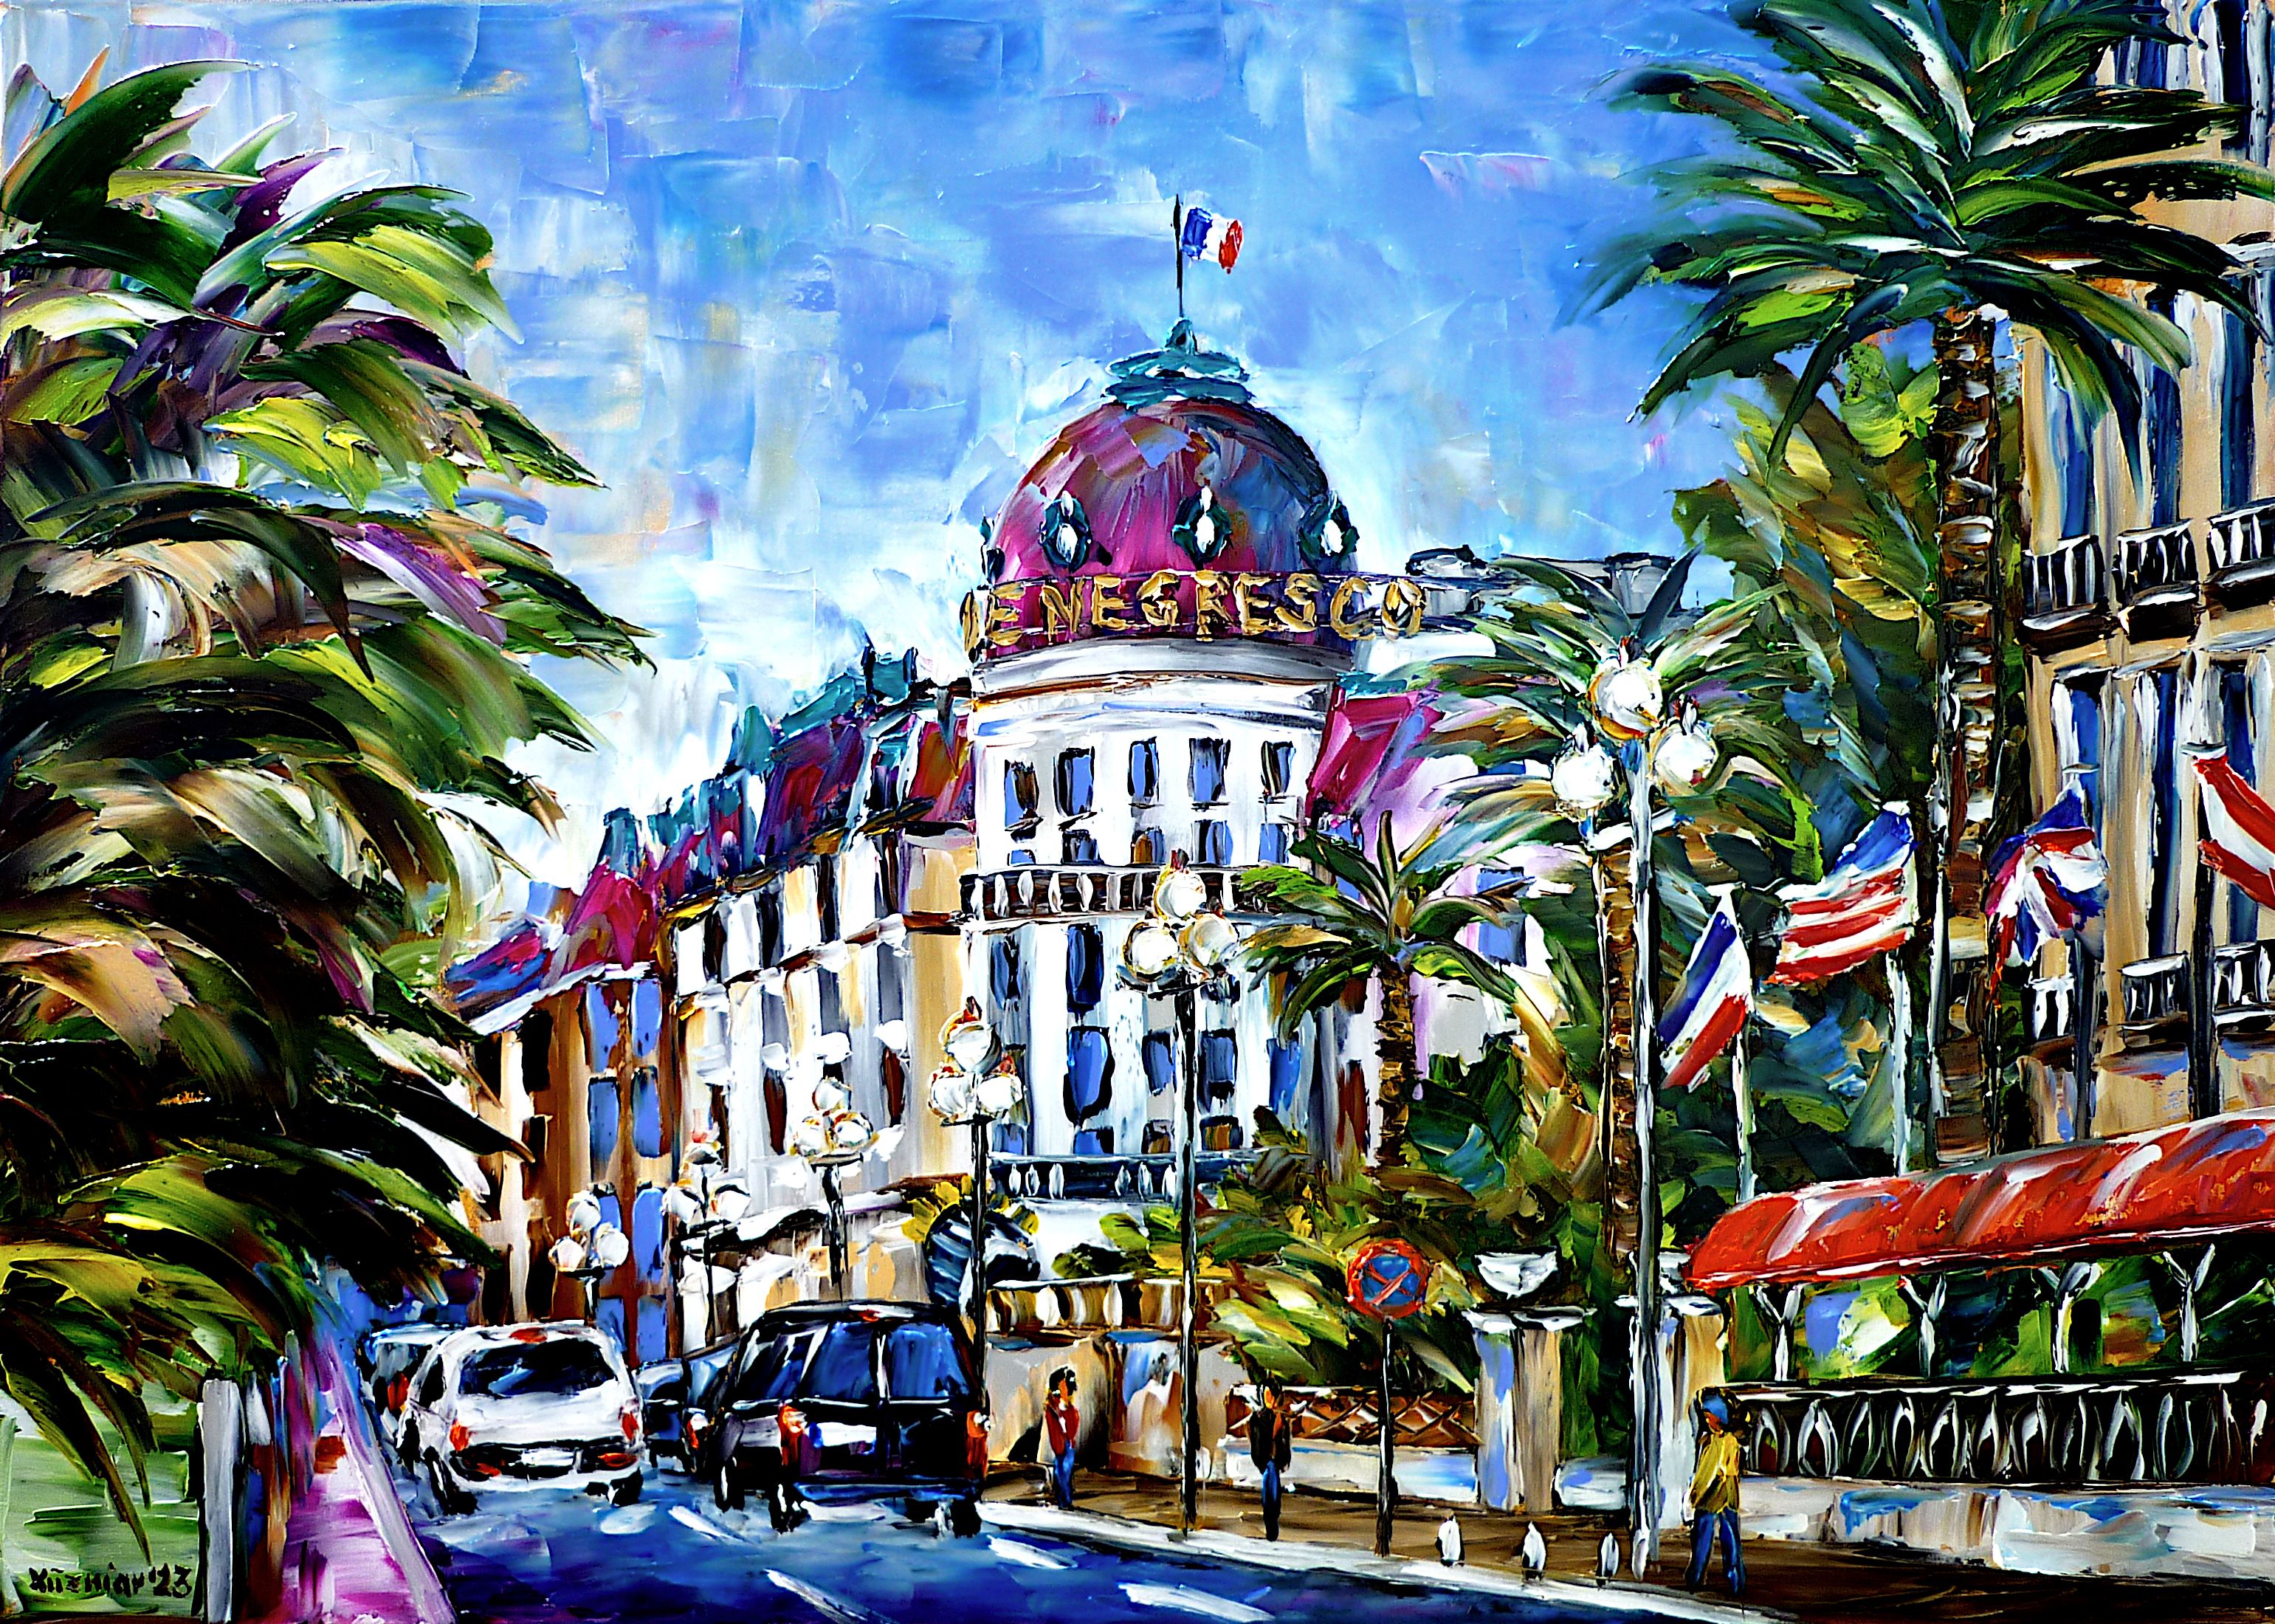 hotel le negresco,promenade des anglais,nice cityscape,nice view,le negresco painting,nice painting,nice picture,cote d'azur,summer in nice,southern france,french riviera,nice palm trees,summer on the cote d'azur,summer in south of france,beautiful nice,nice beauty,nice scene,nice love,nice lover,beautiful south of france,south of france love,south of france lover,i love nice,i love south of france,south of france painting,le negresco view,palette knife oil painting,modern art,figurative art,figurative painting,contemporary painting,abstract painting,lively colors,colorful painting,bright colors,impasto painting